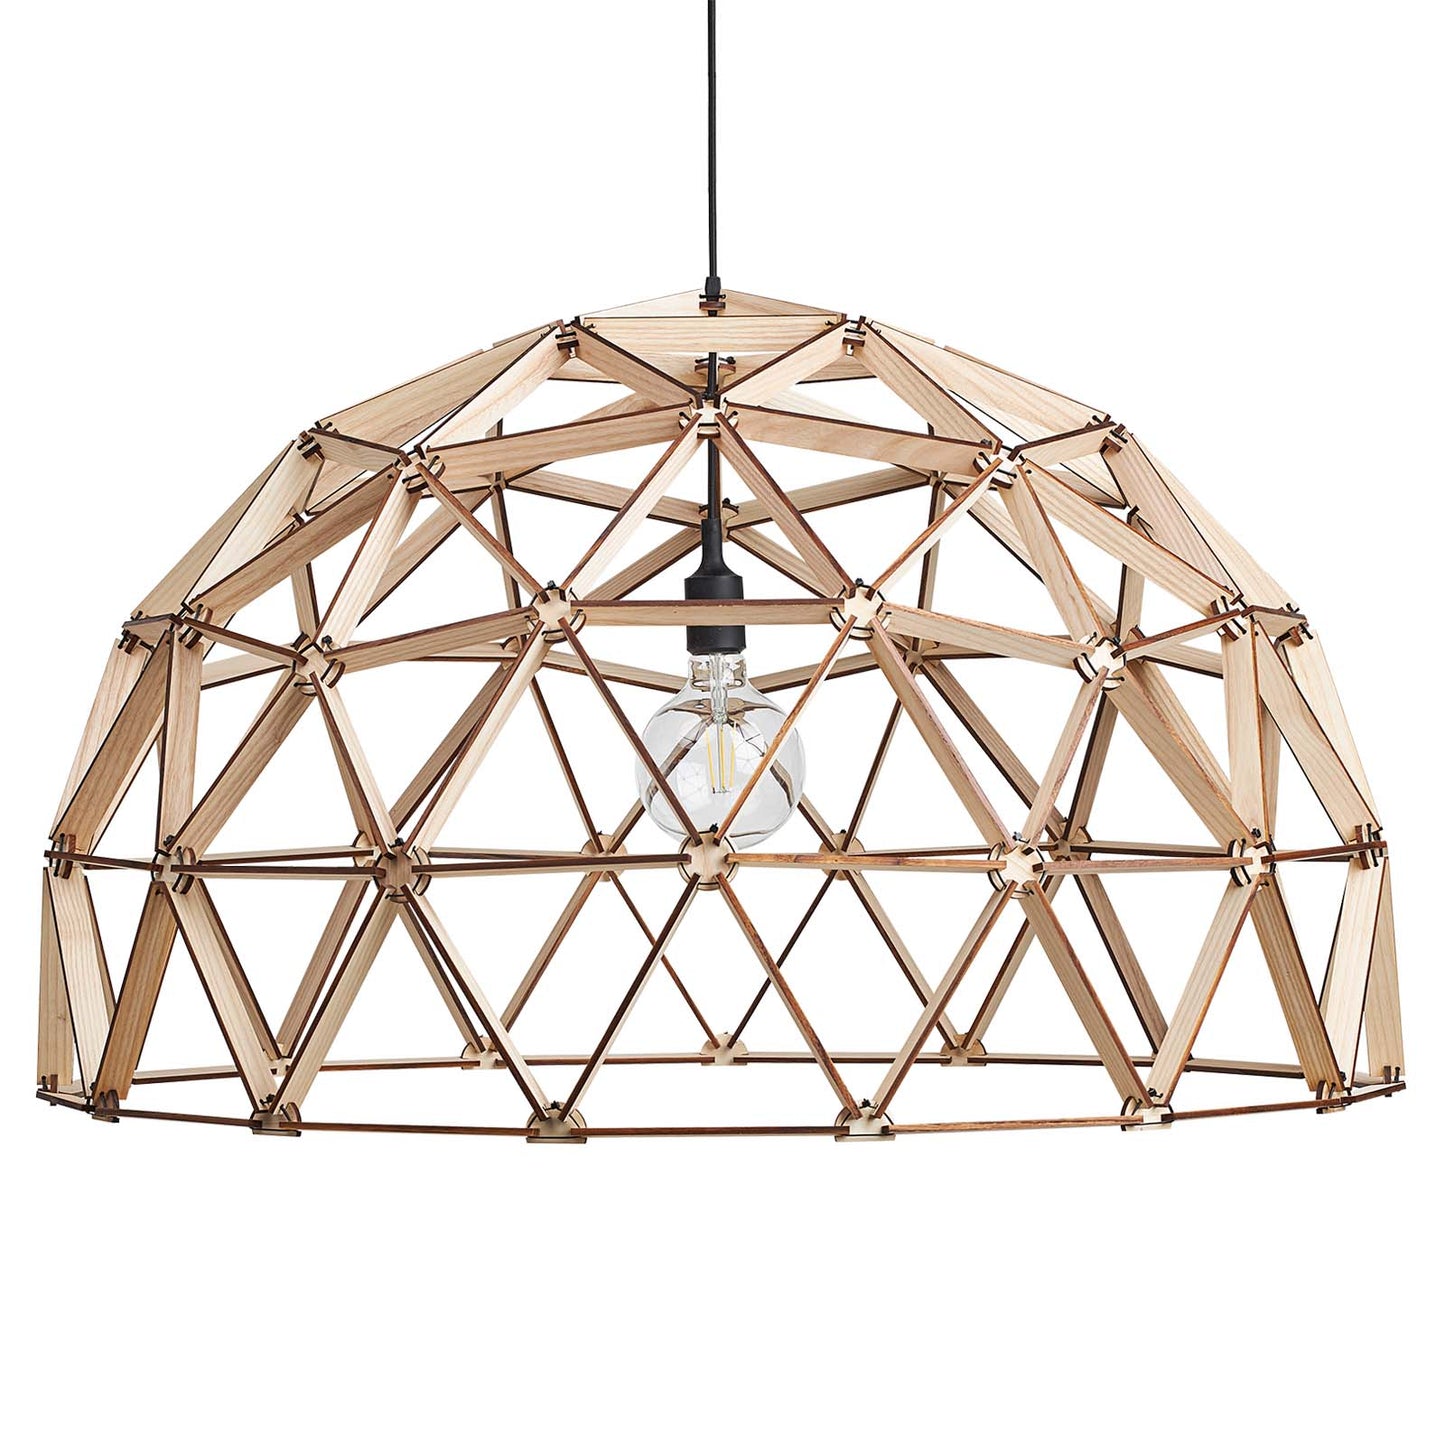 Dome lamp ø100cm hanging lamp made of wood FSC 100%